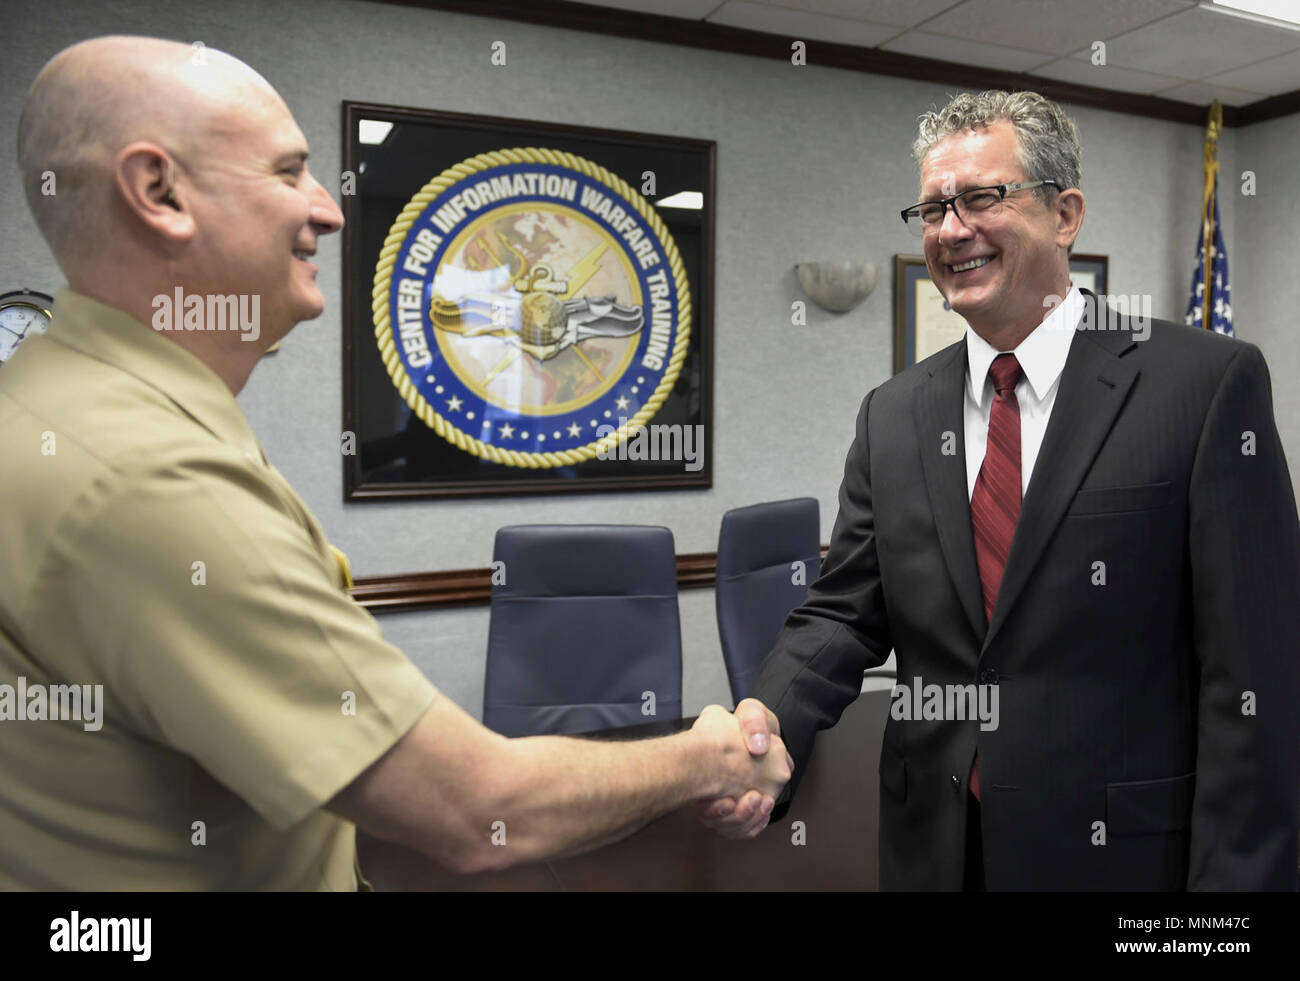 Fla. (March 19, 2018) Capt. Bill Lintz, commanding officer of the Center for Information Warfare Training (CIWT), welcomes onboard Jim Hagy, CIWT's new executive director. As executive director, Hagy will provide advice and assistance to the commanding officer in both operational and strategic matters. Stock Photo